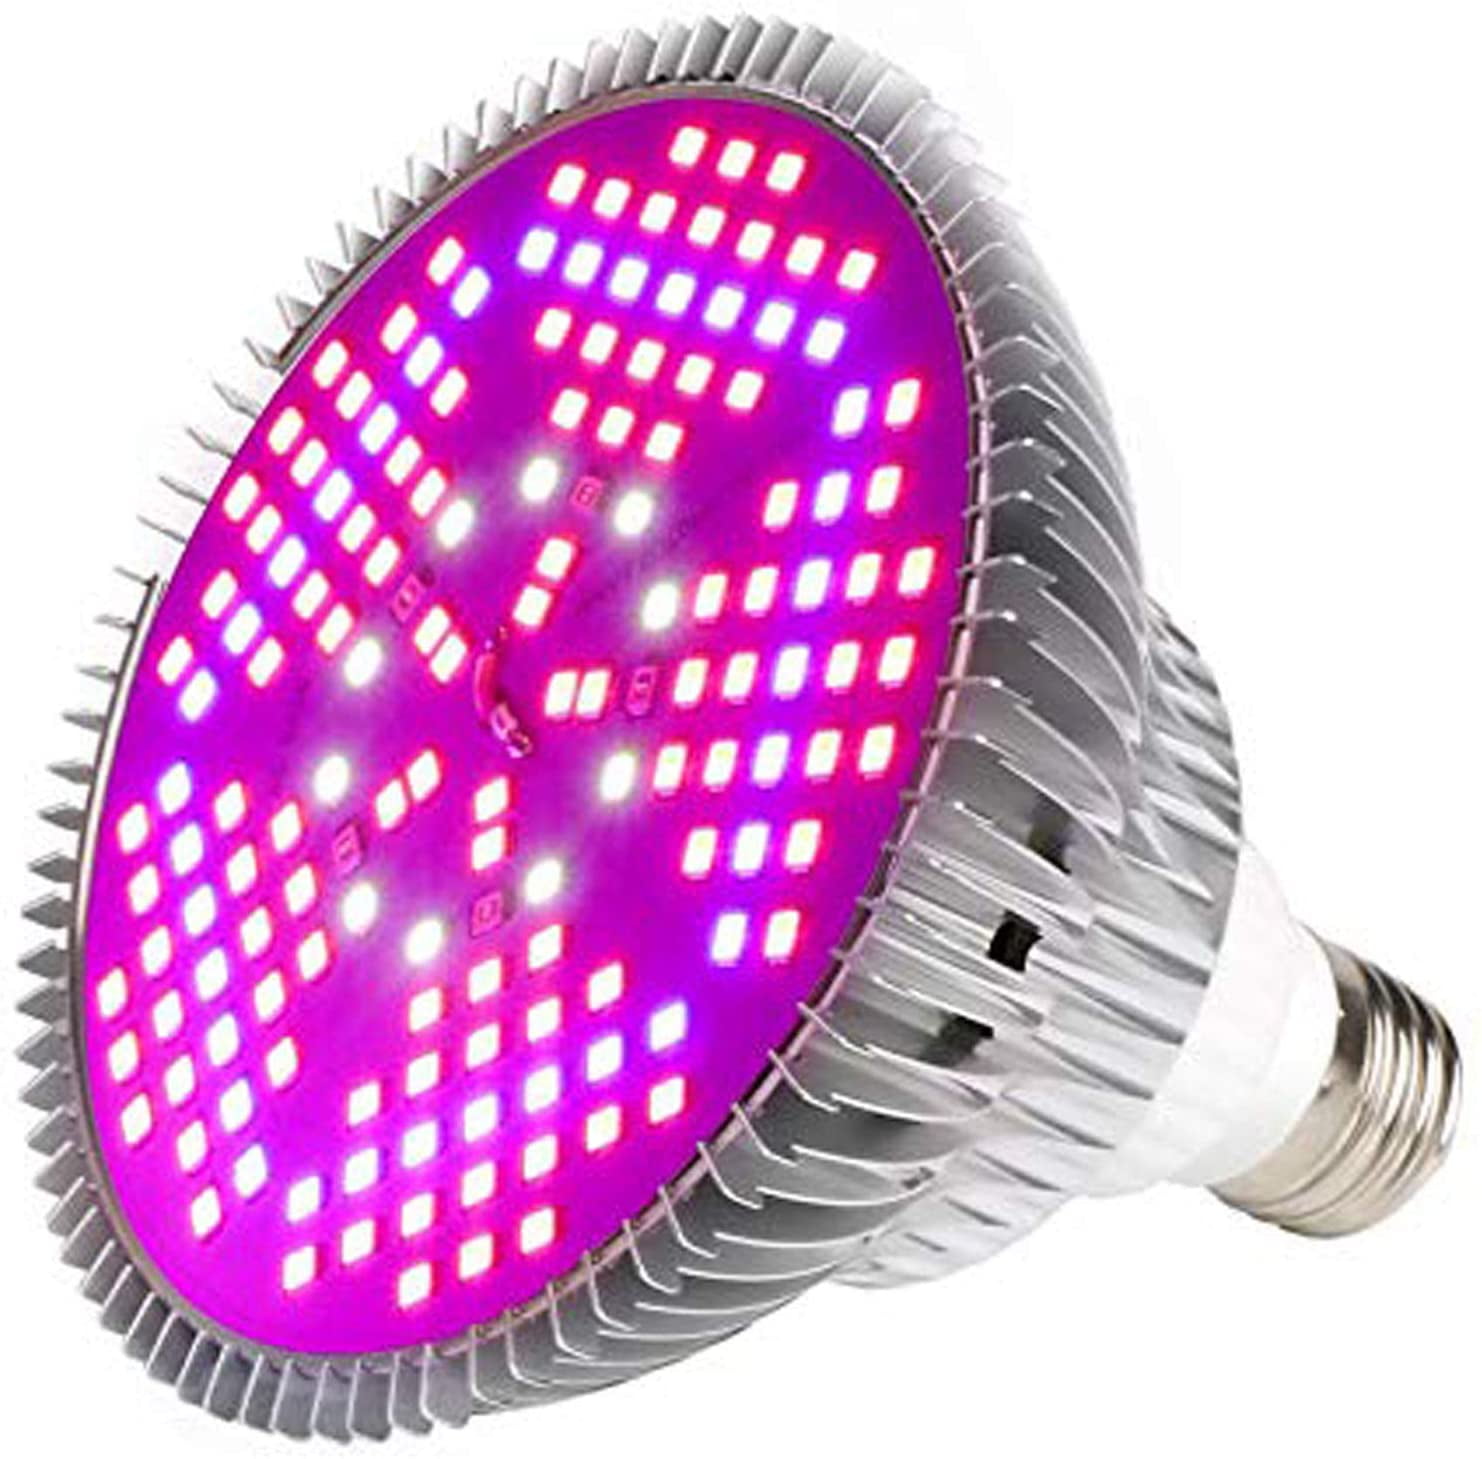 E26 12W LED Plant Grow Light Full Spectrum Indoor Hydroponic Plants Growing Lamp 